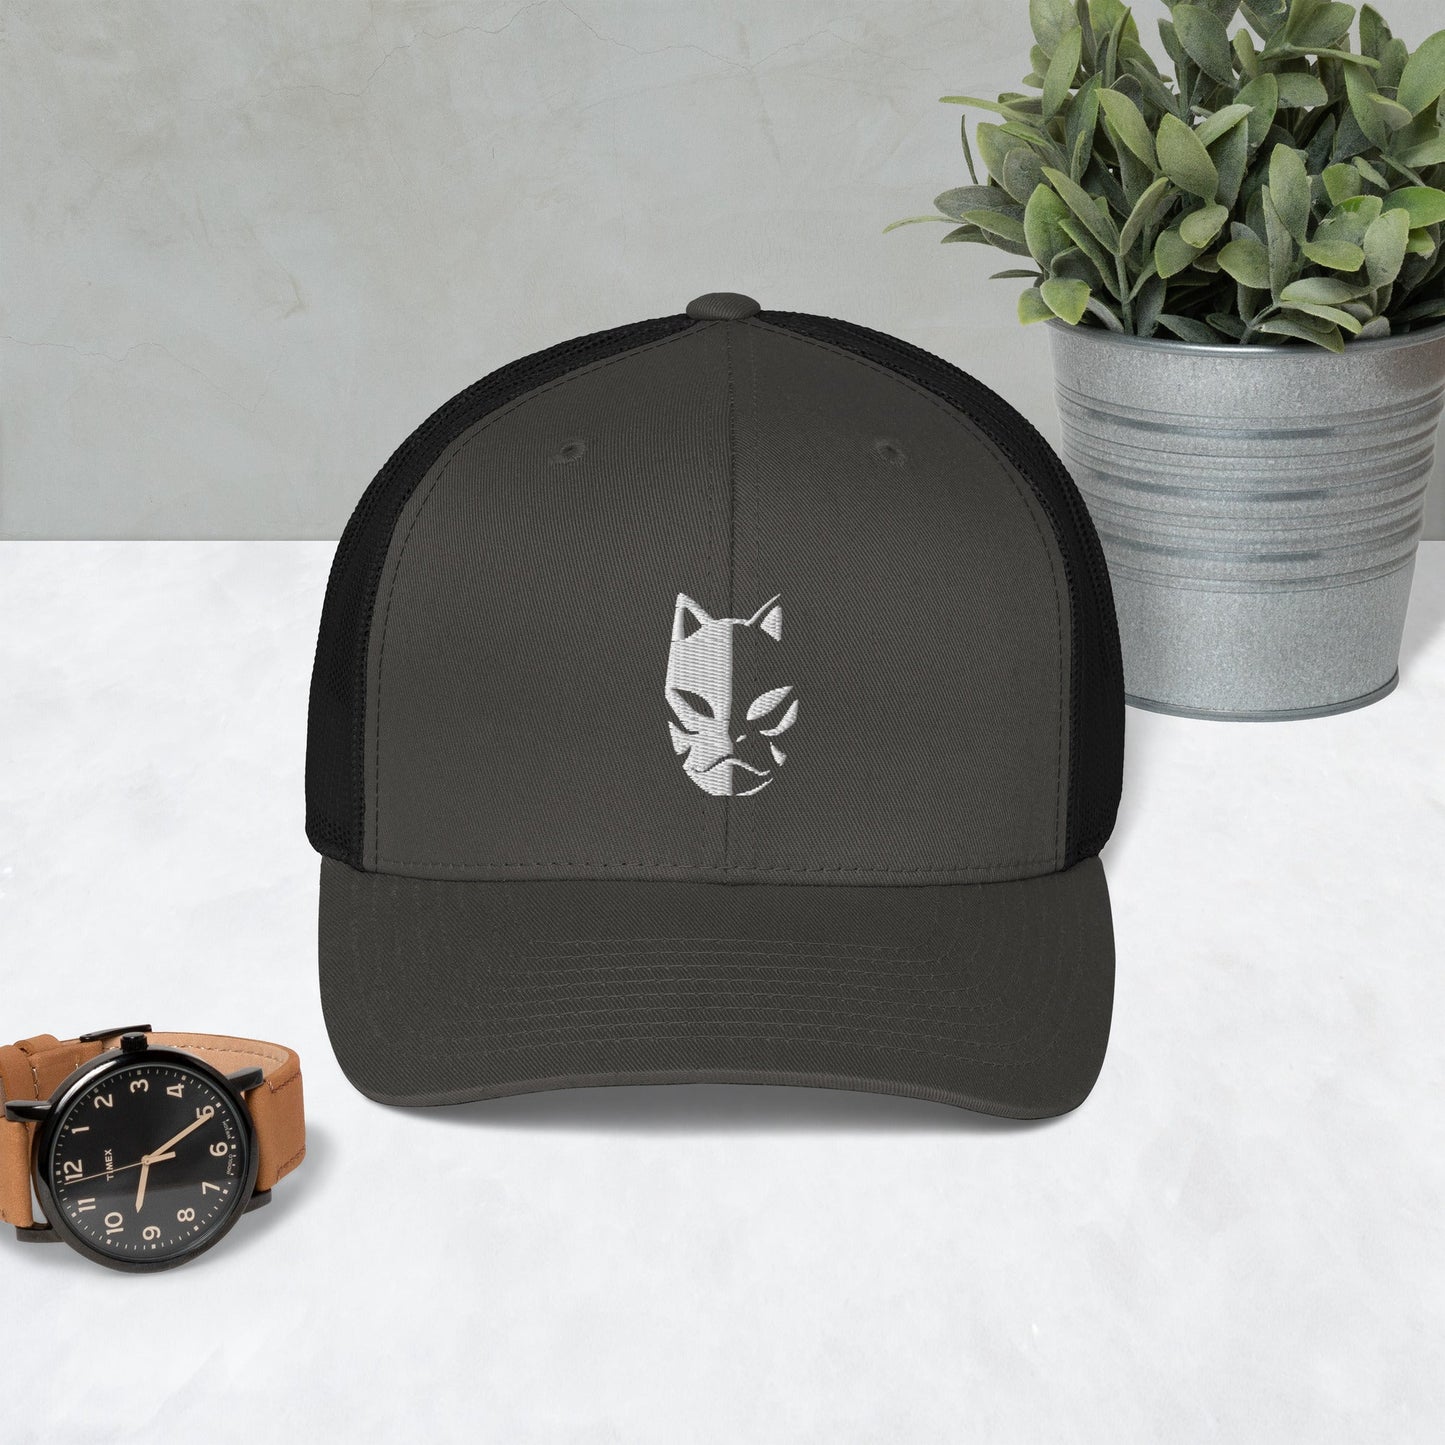 Anbu Mask Embroidered Trucker Hat